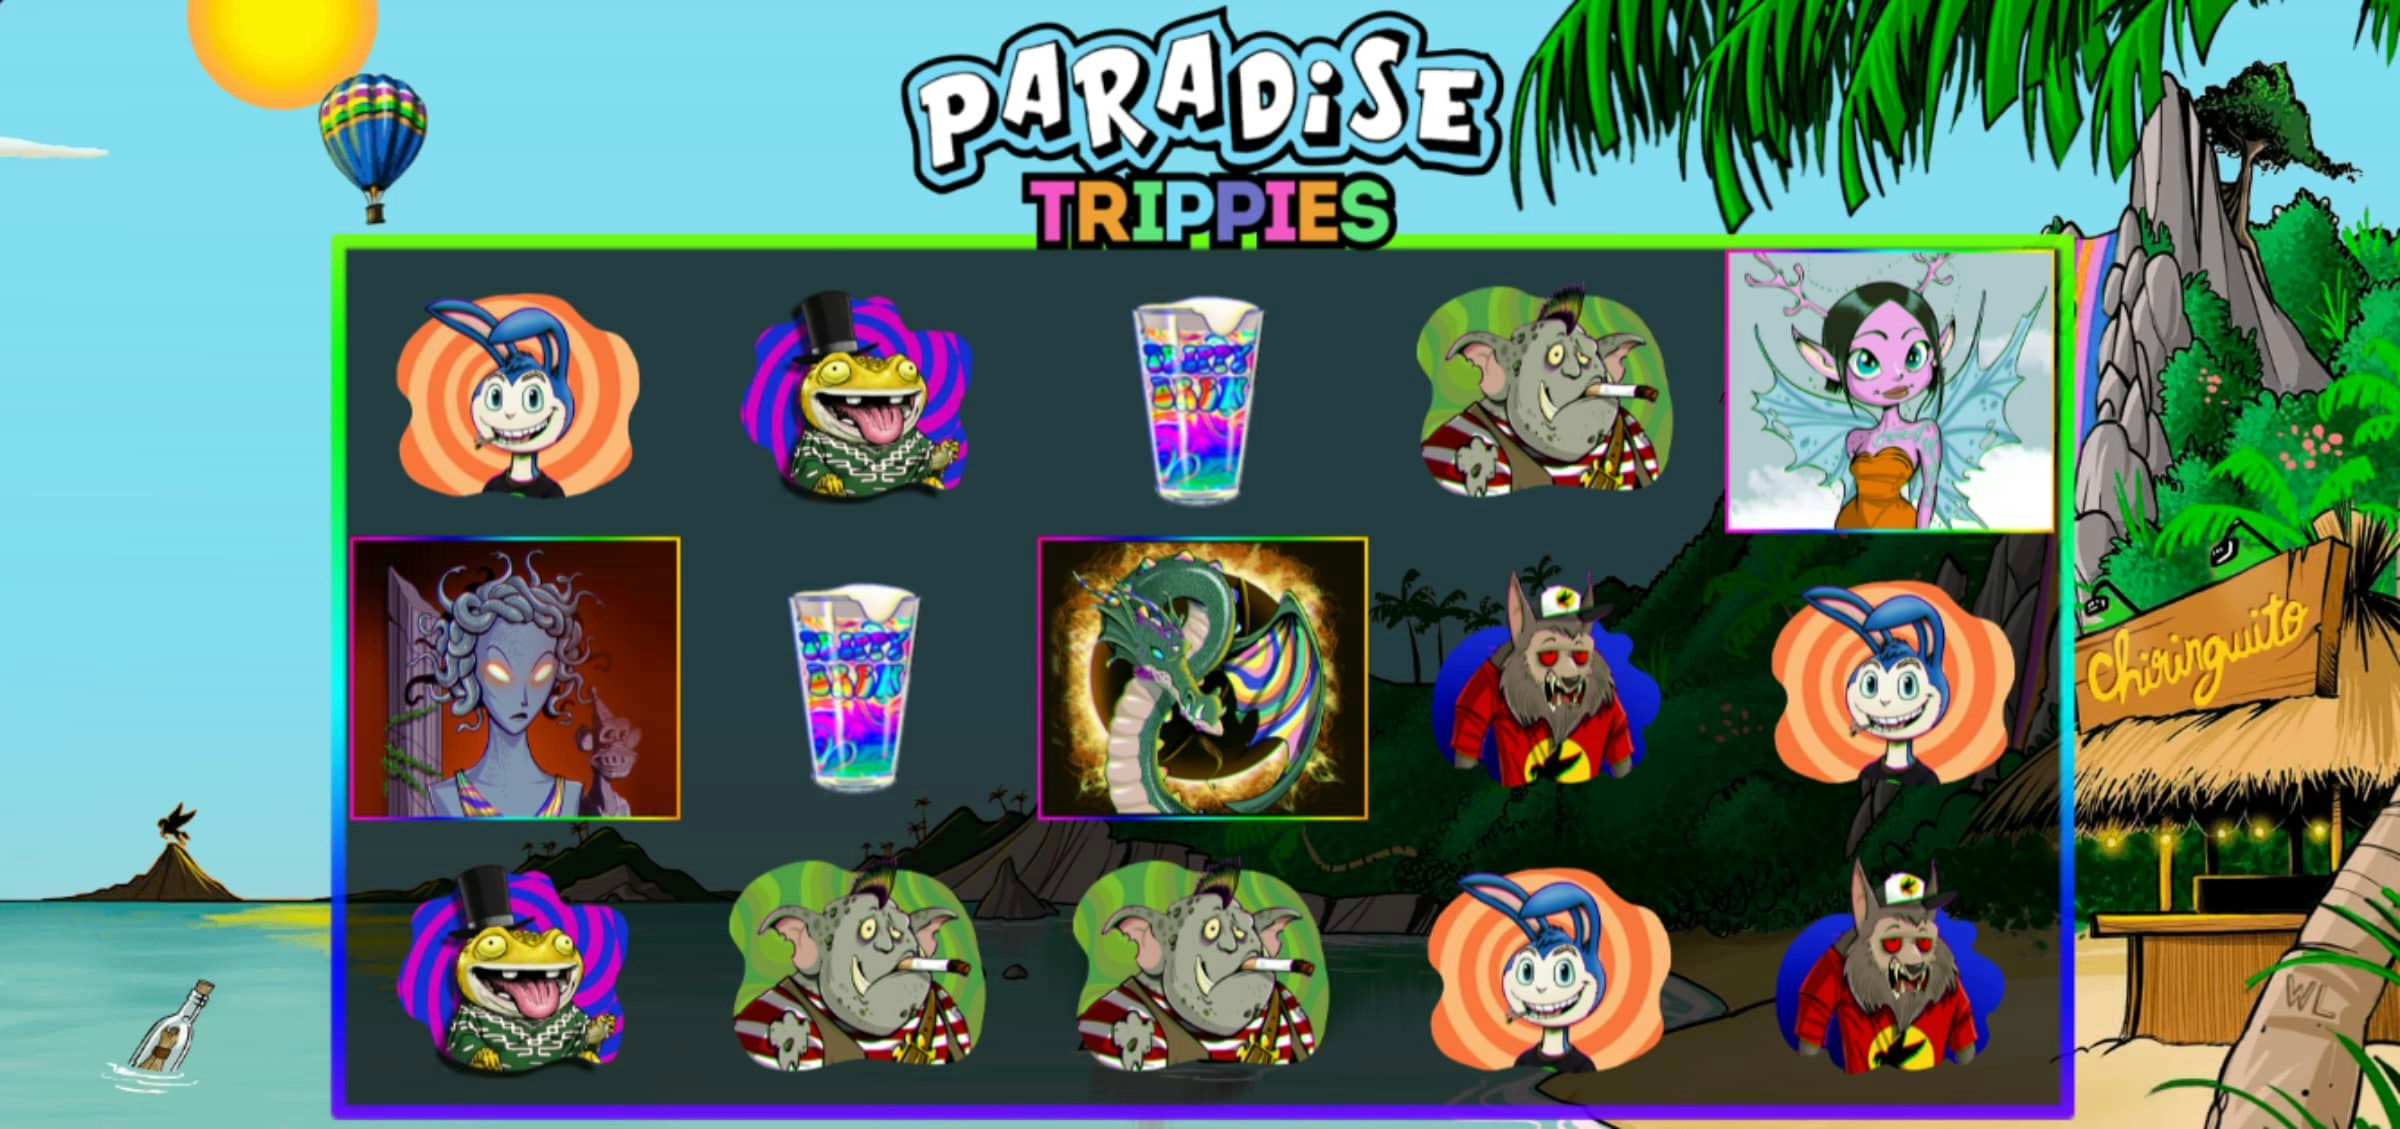 Paradise Trippies review: Here’s a ticket to a psychedelic paradise